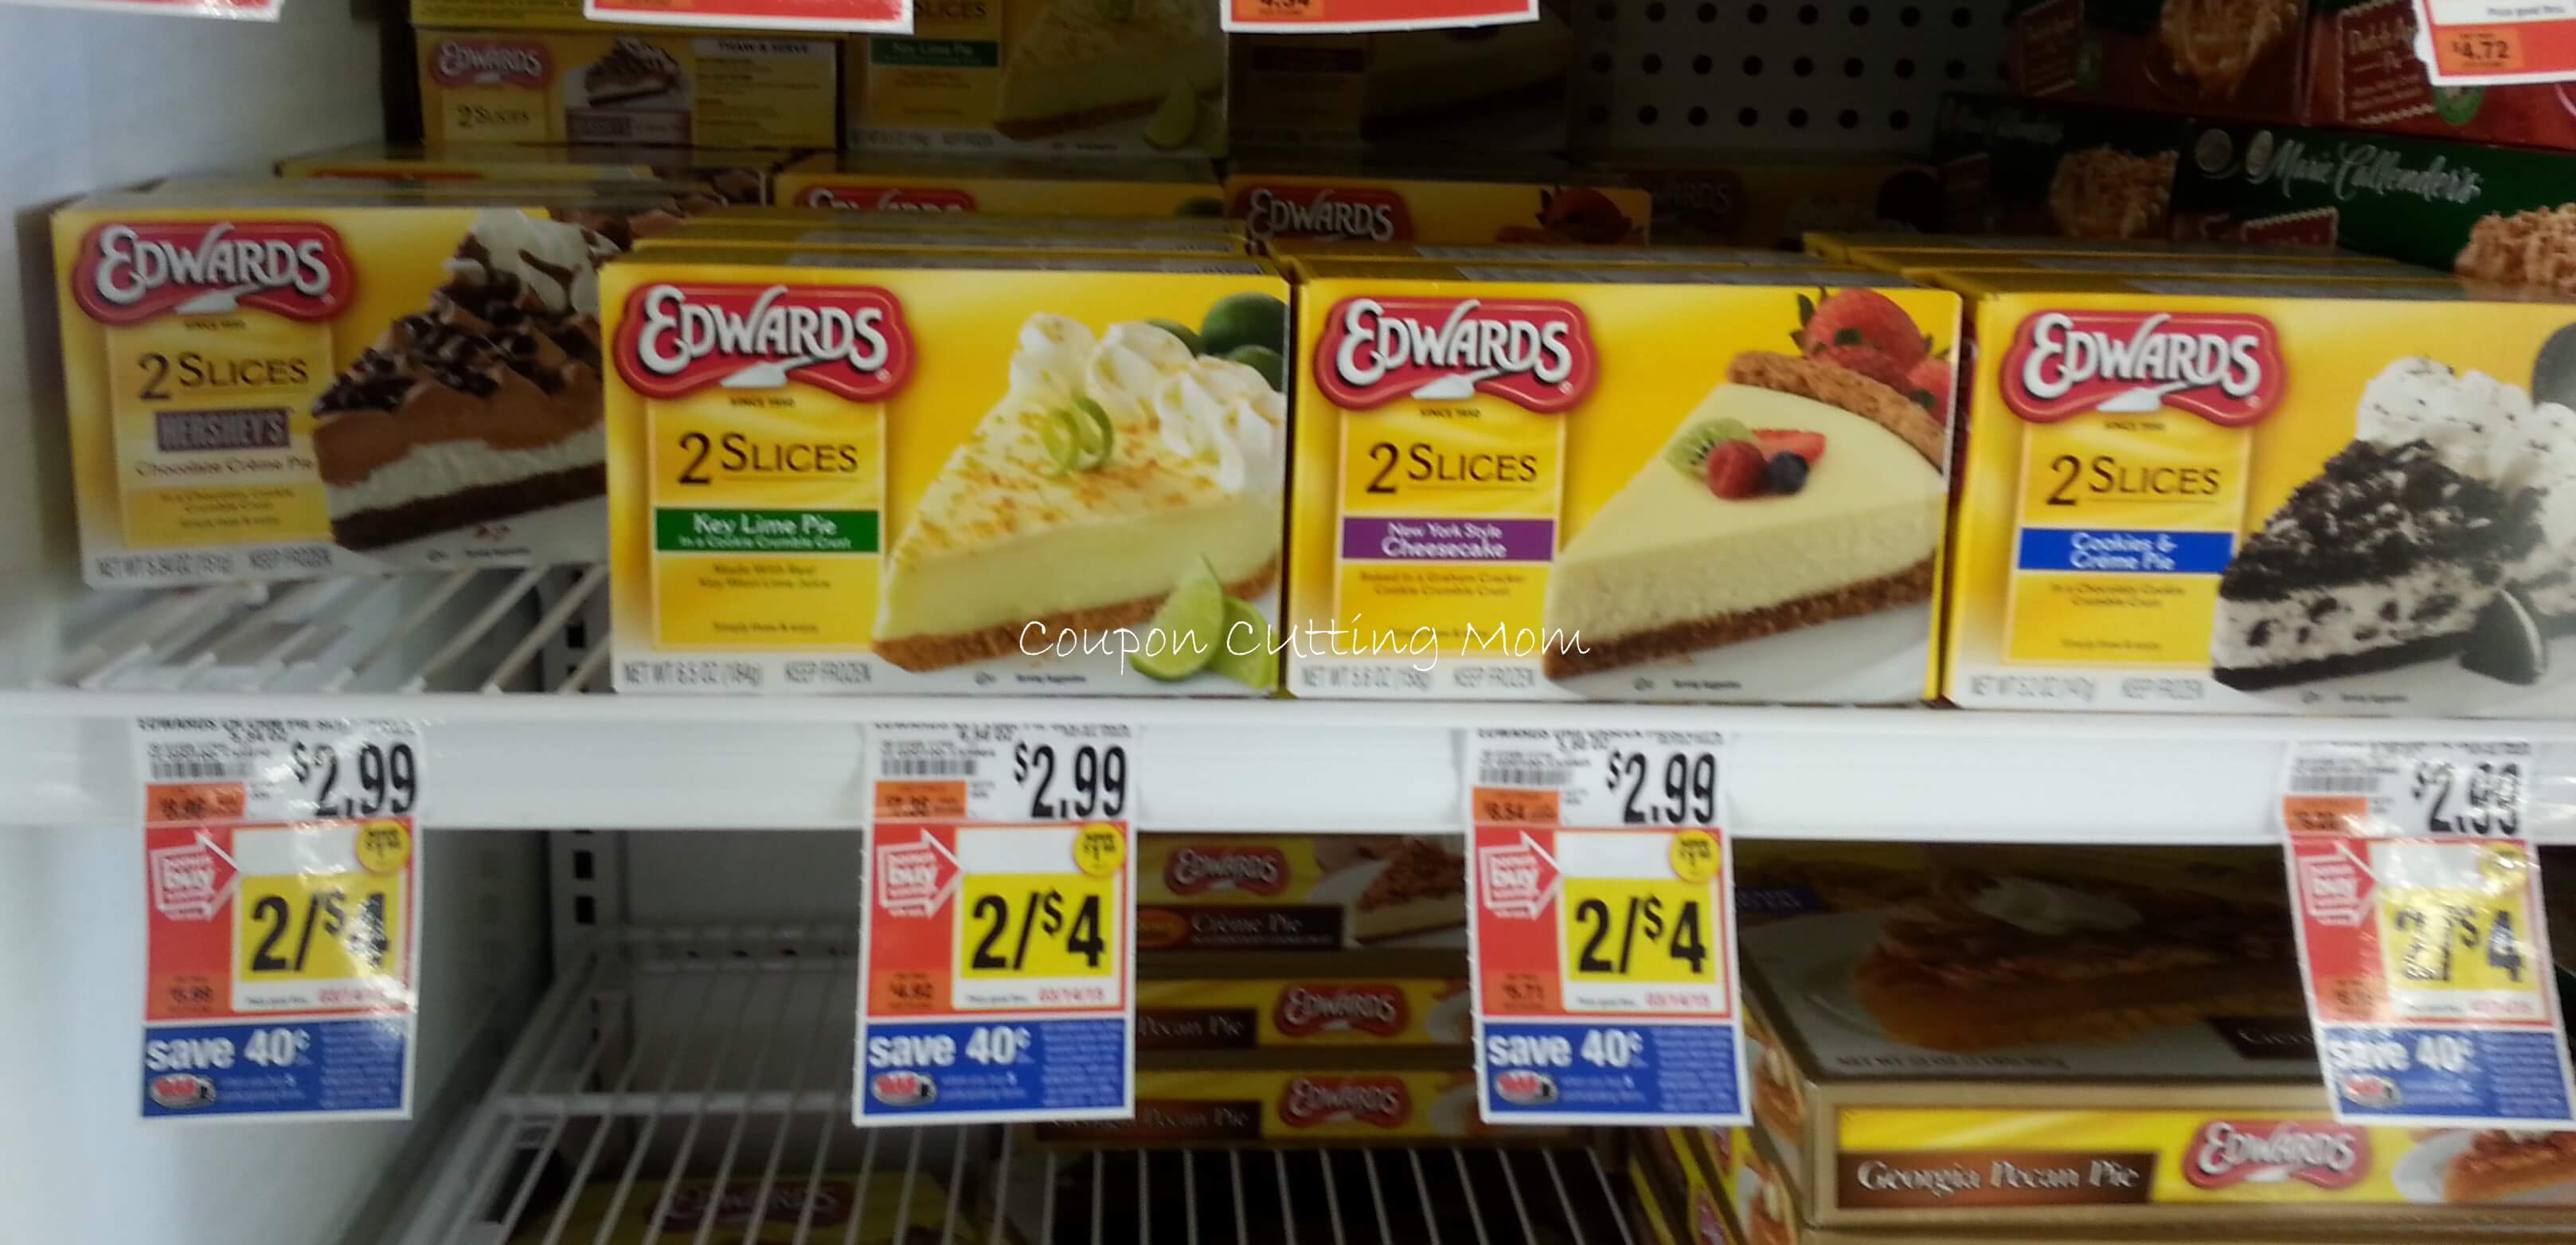 Giant: FREE Edwards Pies (Unadvertised Gas Deal) 